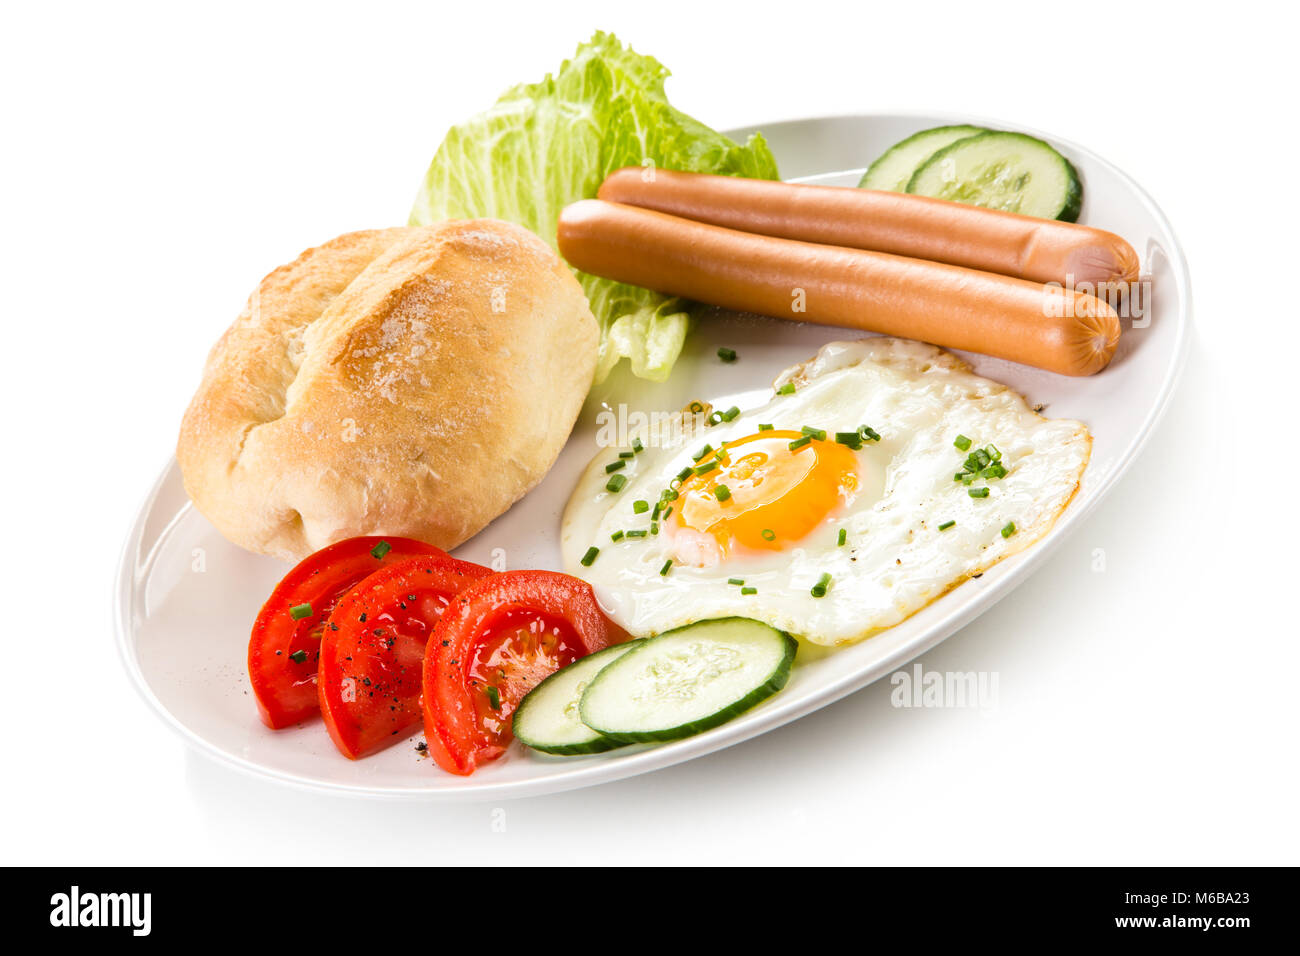 Breakfast - fried egg and sausages Stock Photo